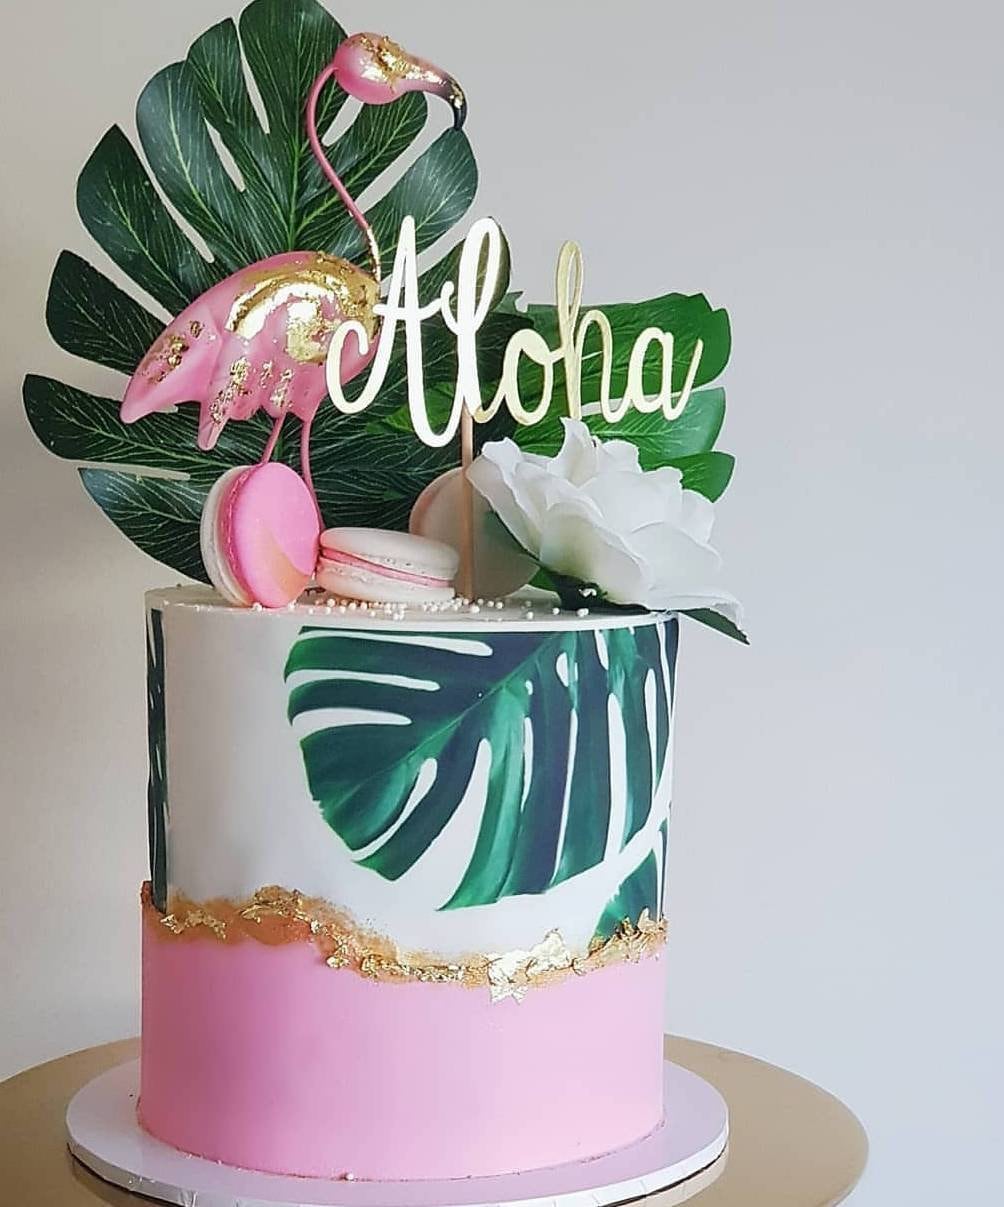 Vanilla Bake Shop - Reminiscing over this cute Palm leaf birthday cake we  did for one of our favorite families... 🍃 Time flies! Over the years we  have been so lucky to